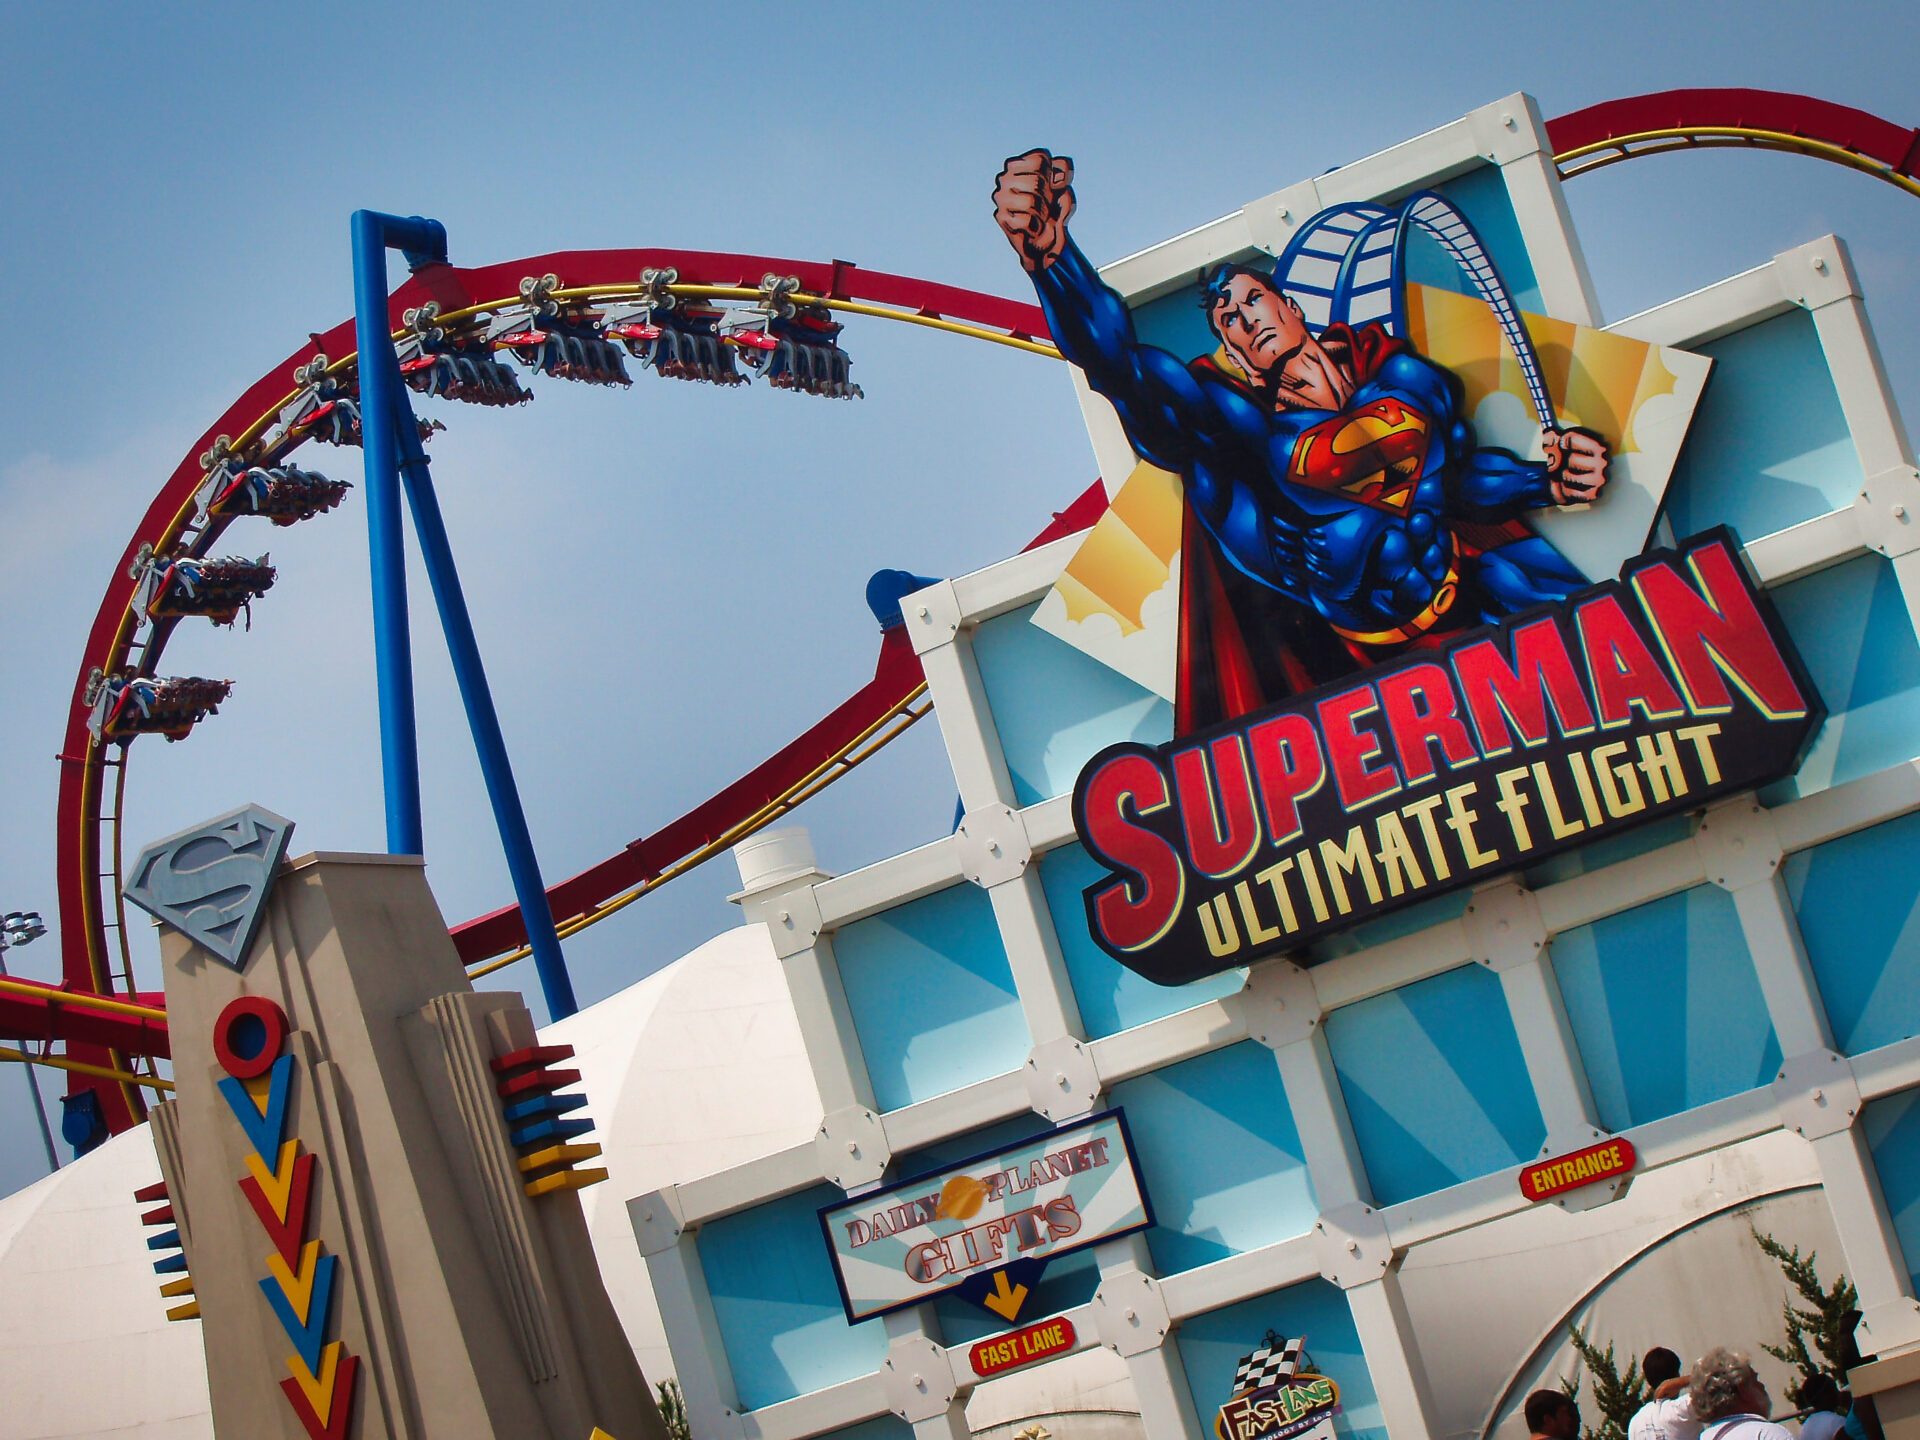 Six Flags Great Adventure New Jersey Superman The Ultimate Flight Flying Coaster Train Sign Entrance